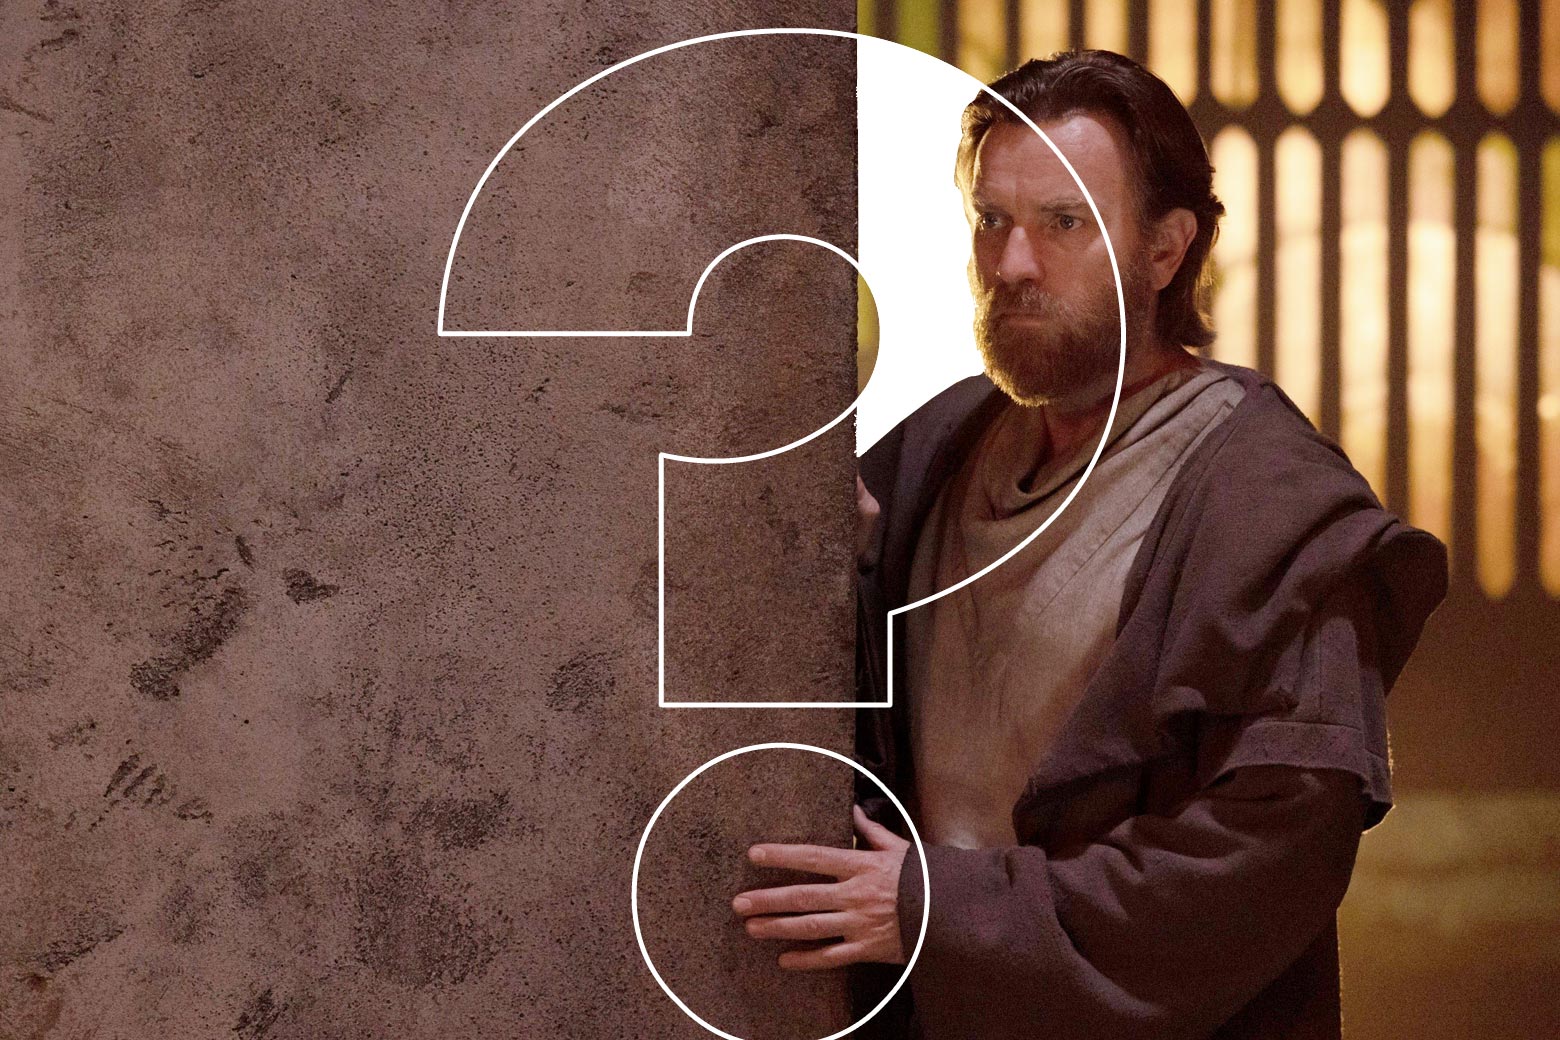 Ewan McGregor, goateed and berobed as Obi-Wan Kenobi, peers around a corner, looking confused. Photoshopped over him, a giant question mark.